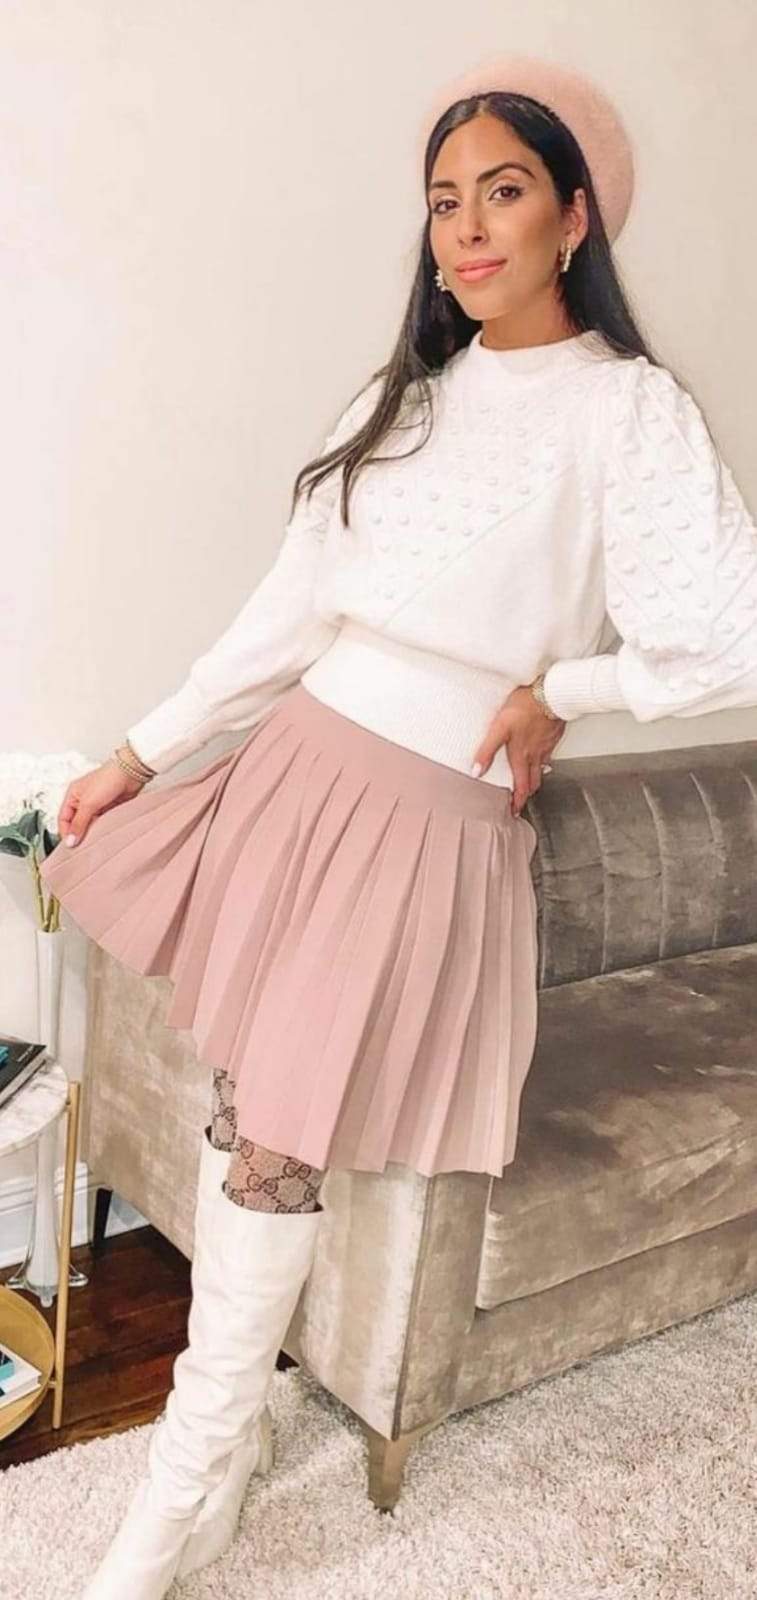 APPARALEL PLEATED KNIT SKIRT 25" DUSTY ROSE